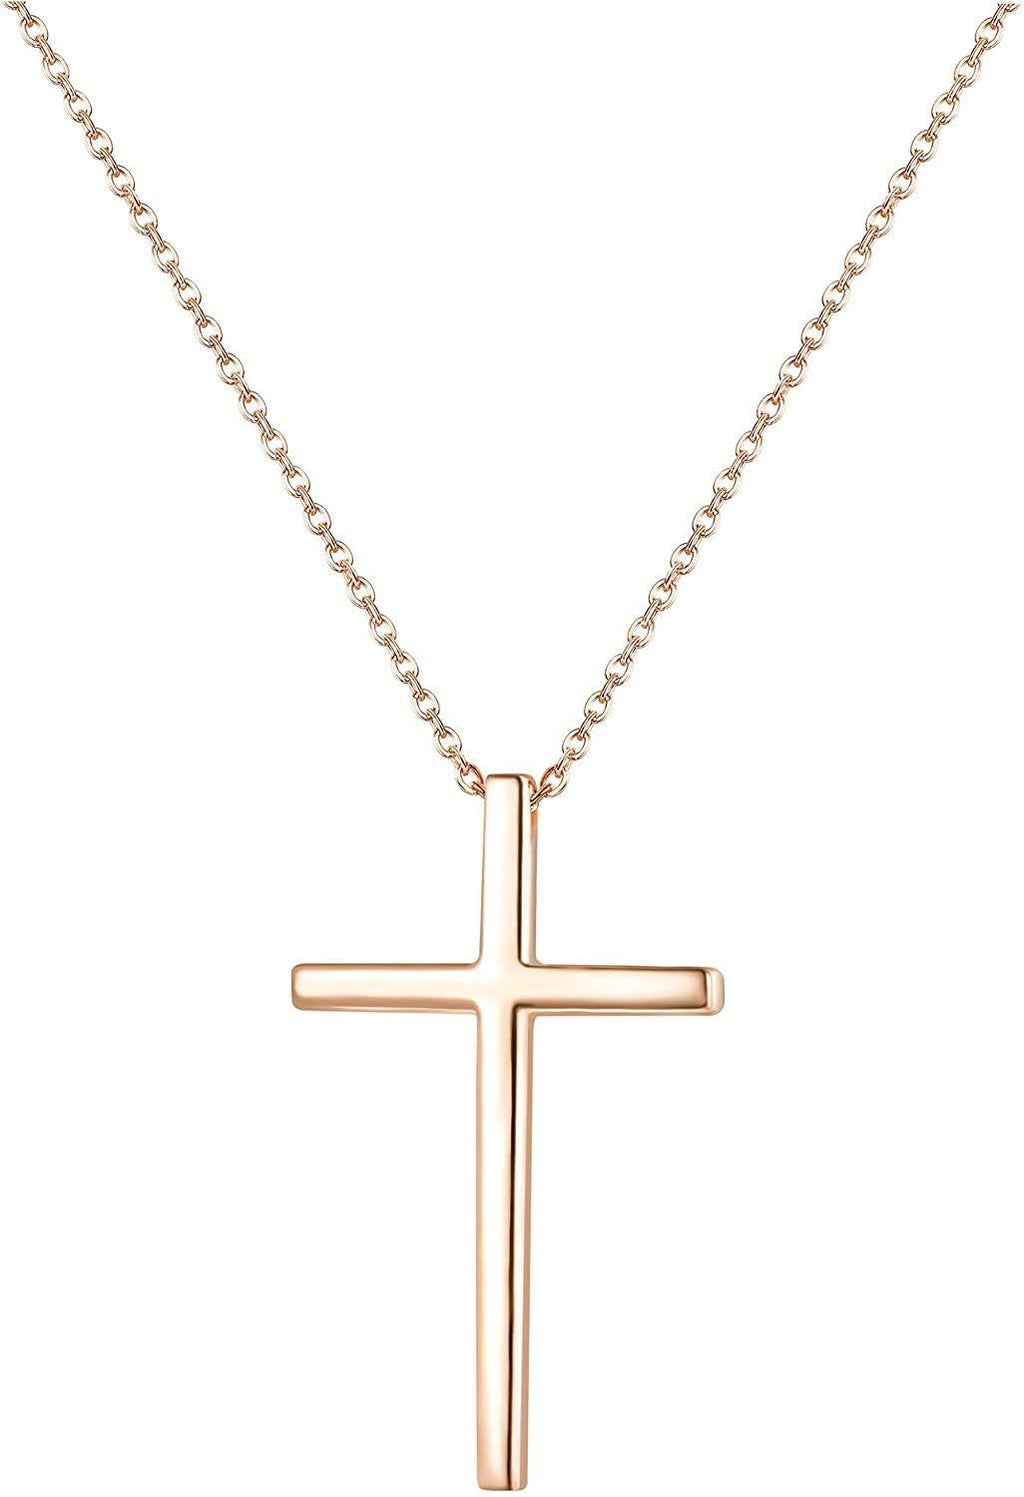 [Australia] - LOLIAS 14K Gold Plated Tiny Cross Necklaces 925 Sterling Silver Cross Necklaces Women Pendant Necklaces Chain Choker Necklaces Gift for Women Necklace Jewelry B:rose Gold 